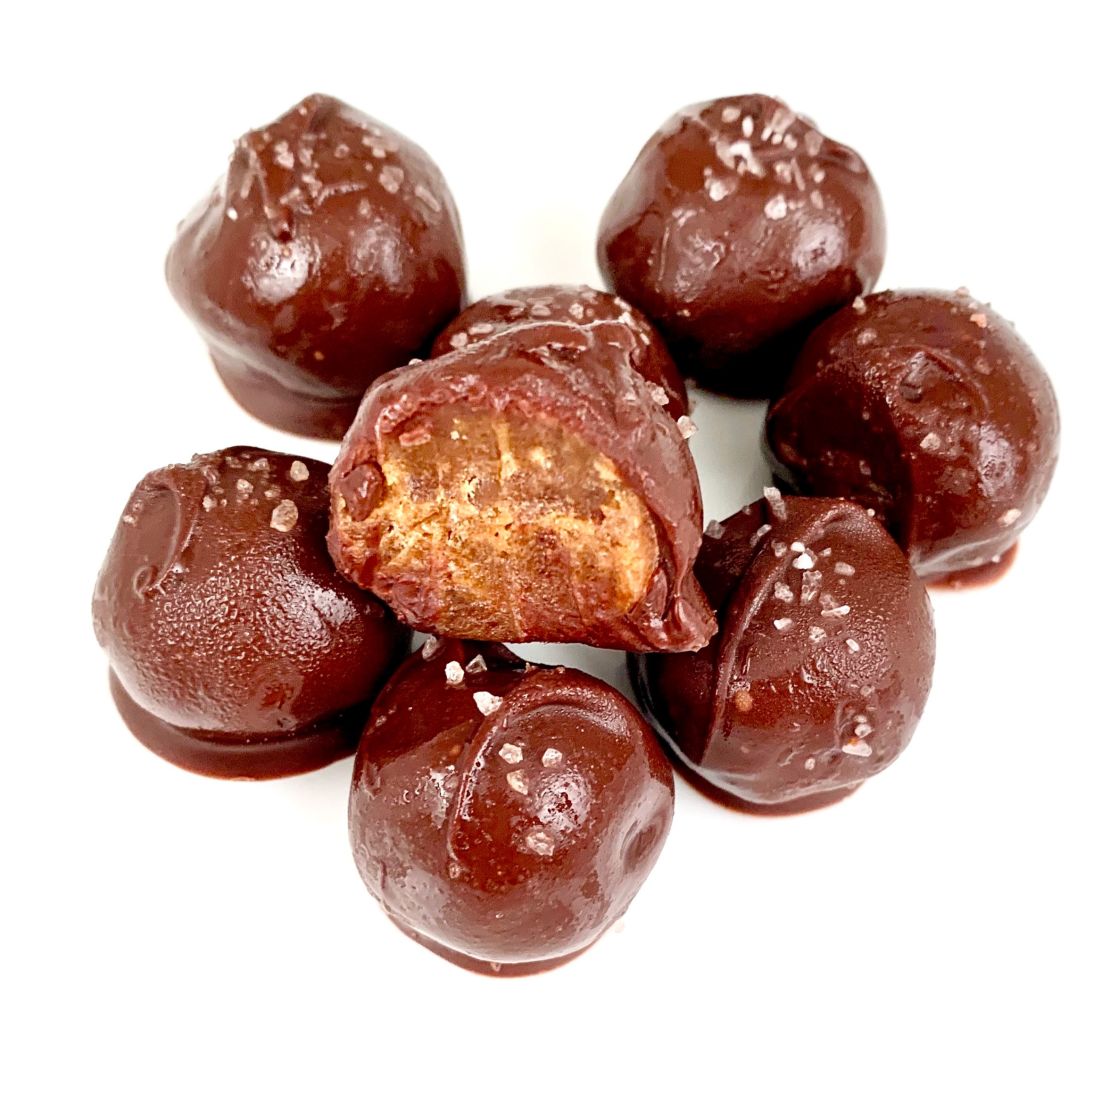 Salted date caramel truffles may satisfy your sweet tooth.